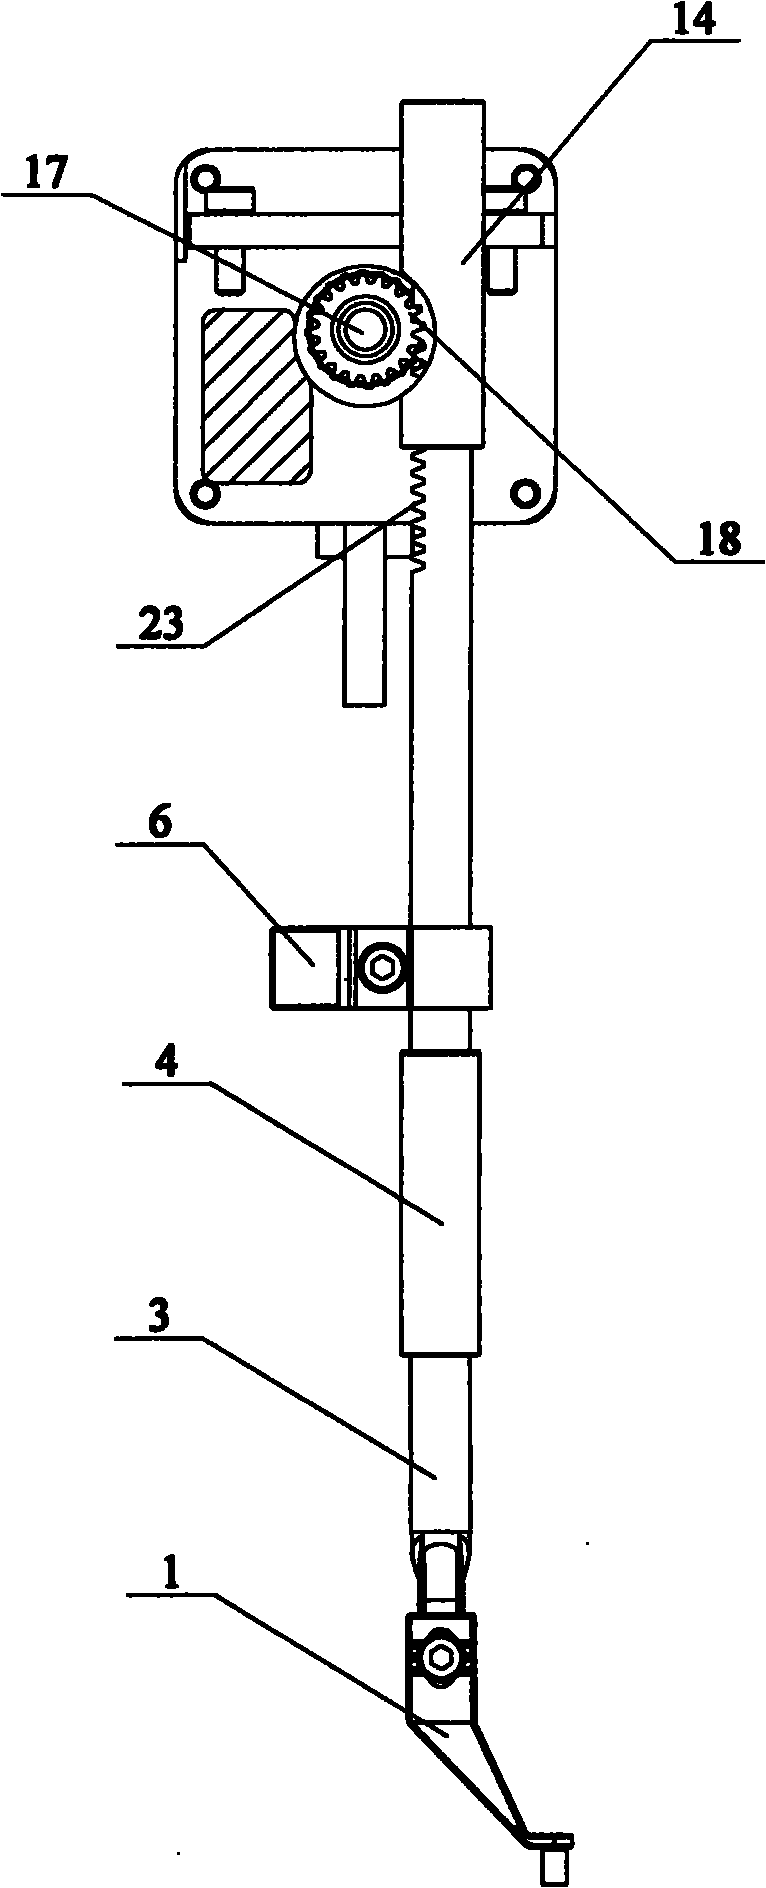 Middle presser foot mechanism of sewing machine